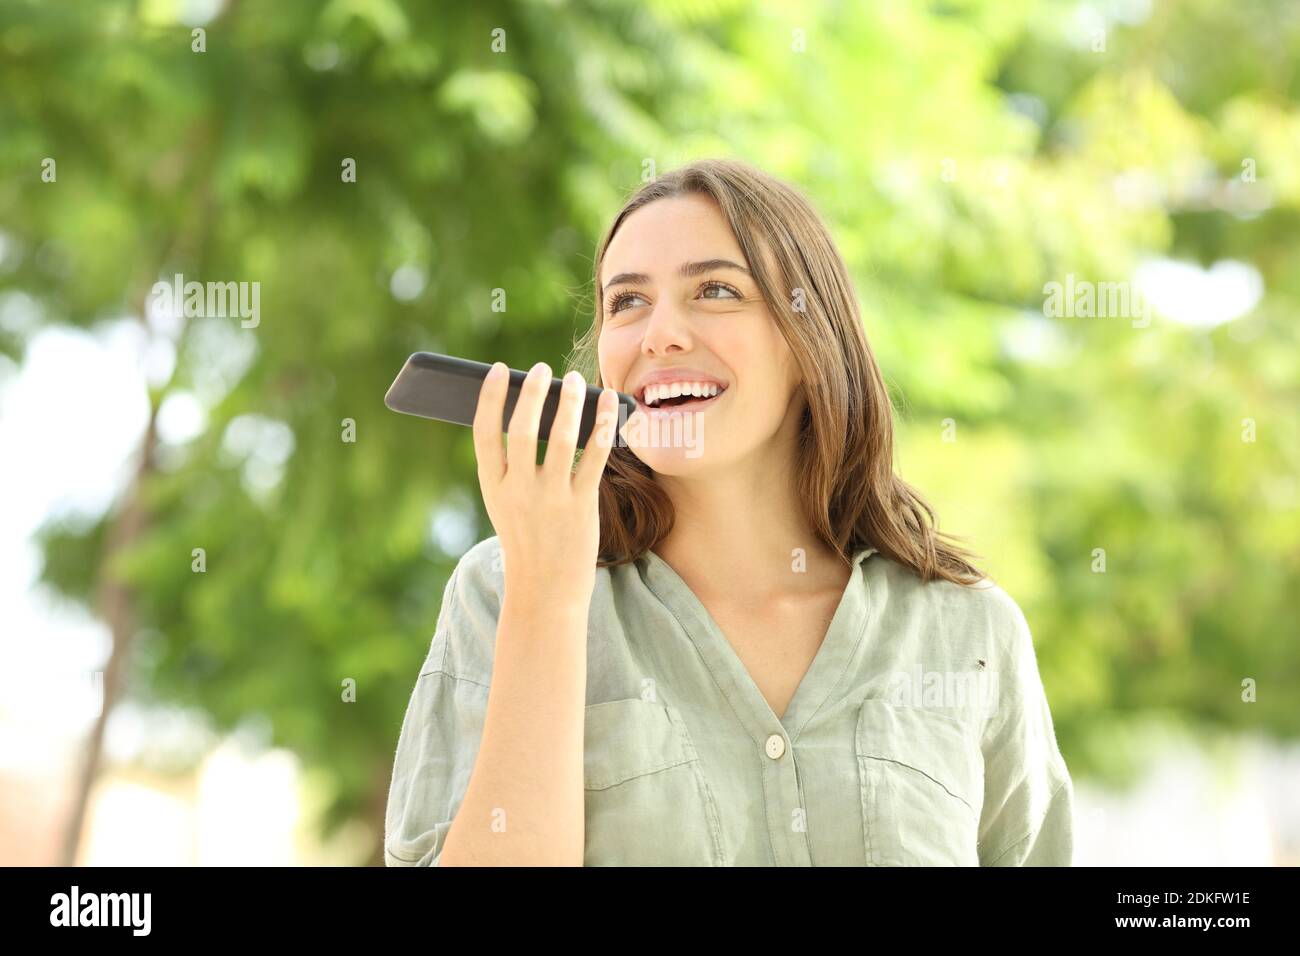 Happy woman recording audio message on smart phone walking in a park Stock Photo